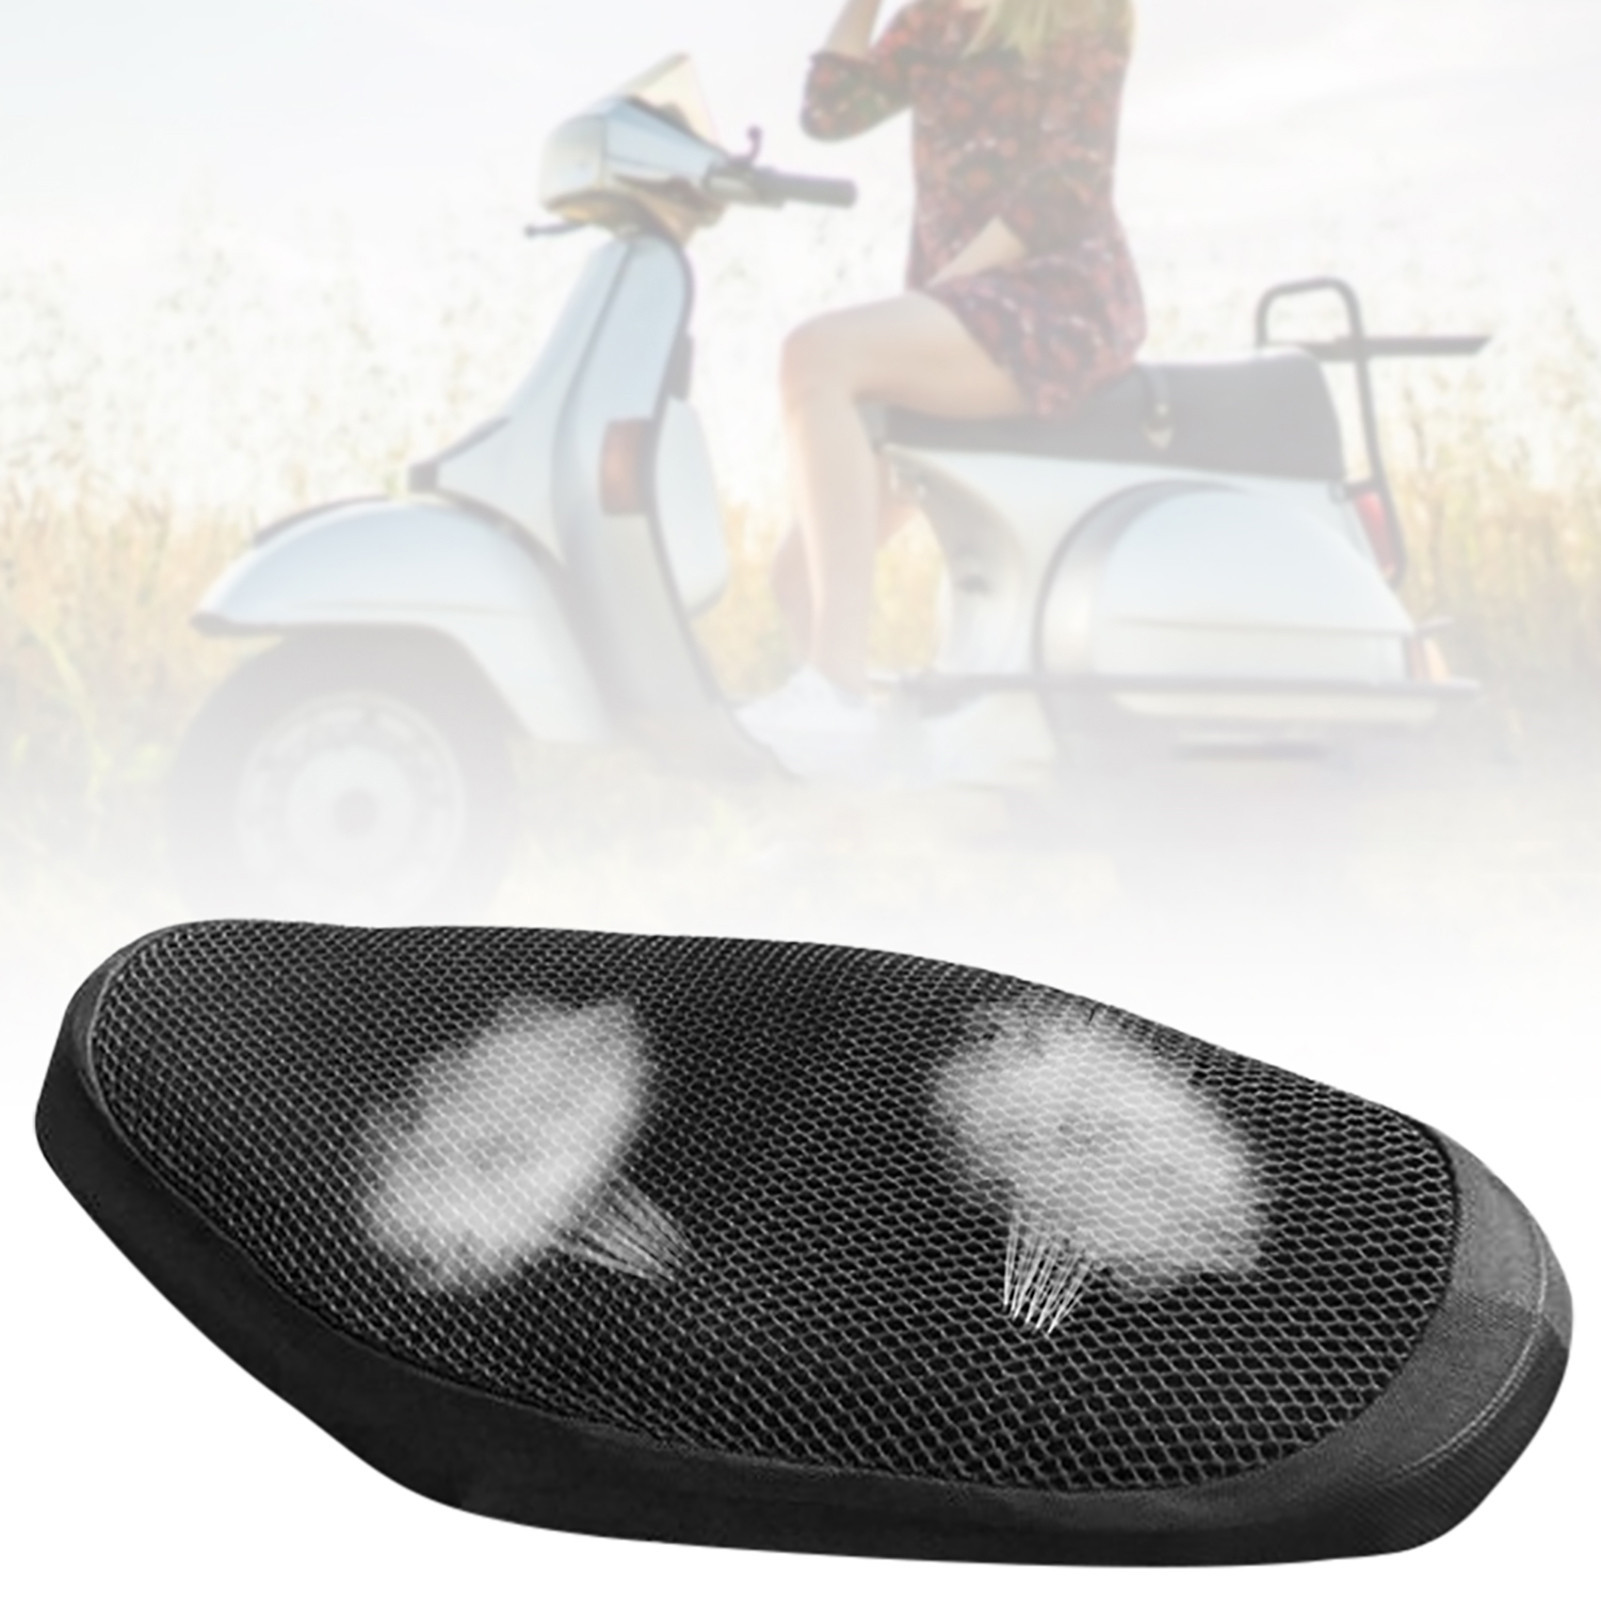 Scooter Seat Cover Motorcycle Scooter Moped Seat Cover Saddle Seat Protector Cover Breathable Net Cushion Black Protection Seat